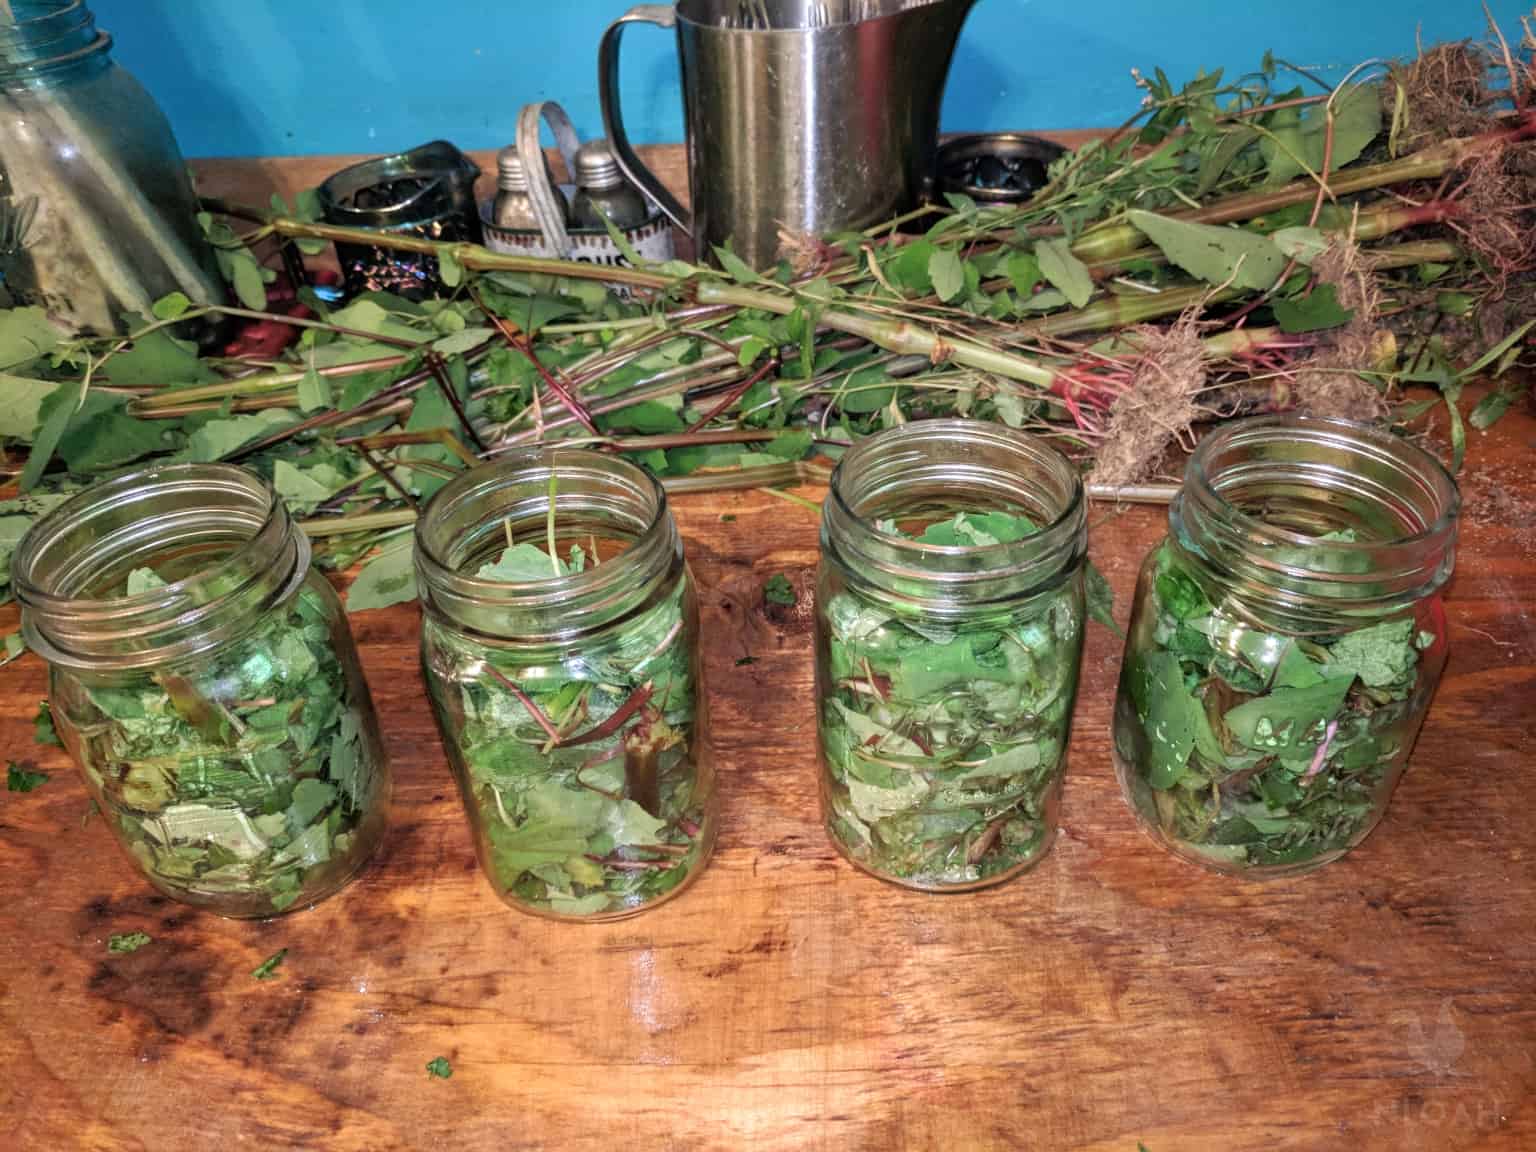 jewelweed stems and leaves in mason jar